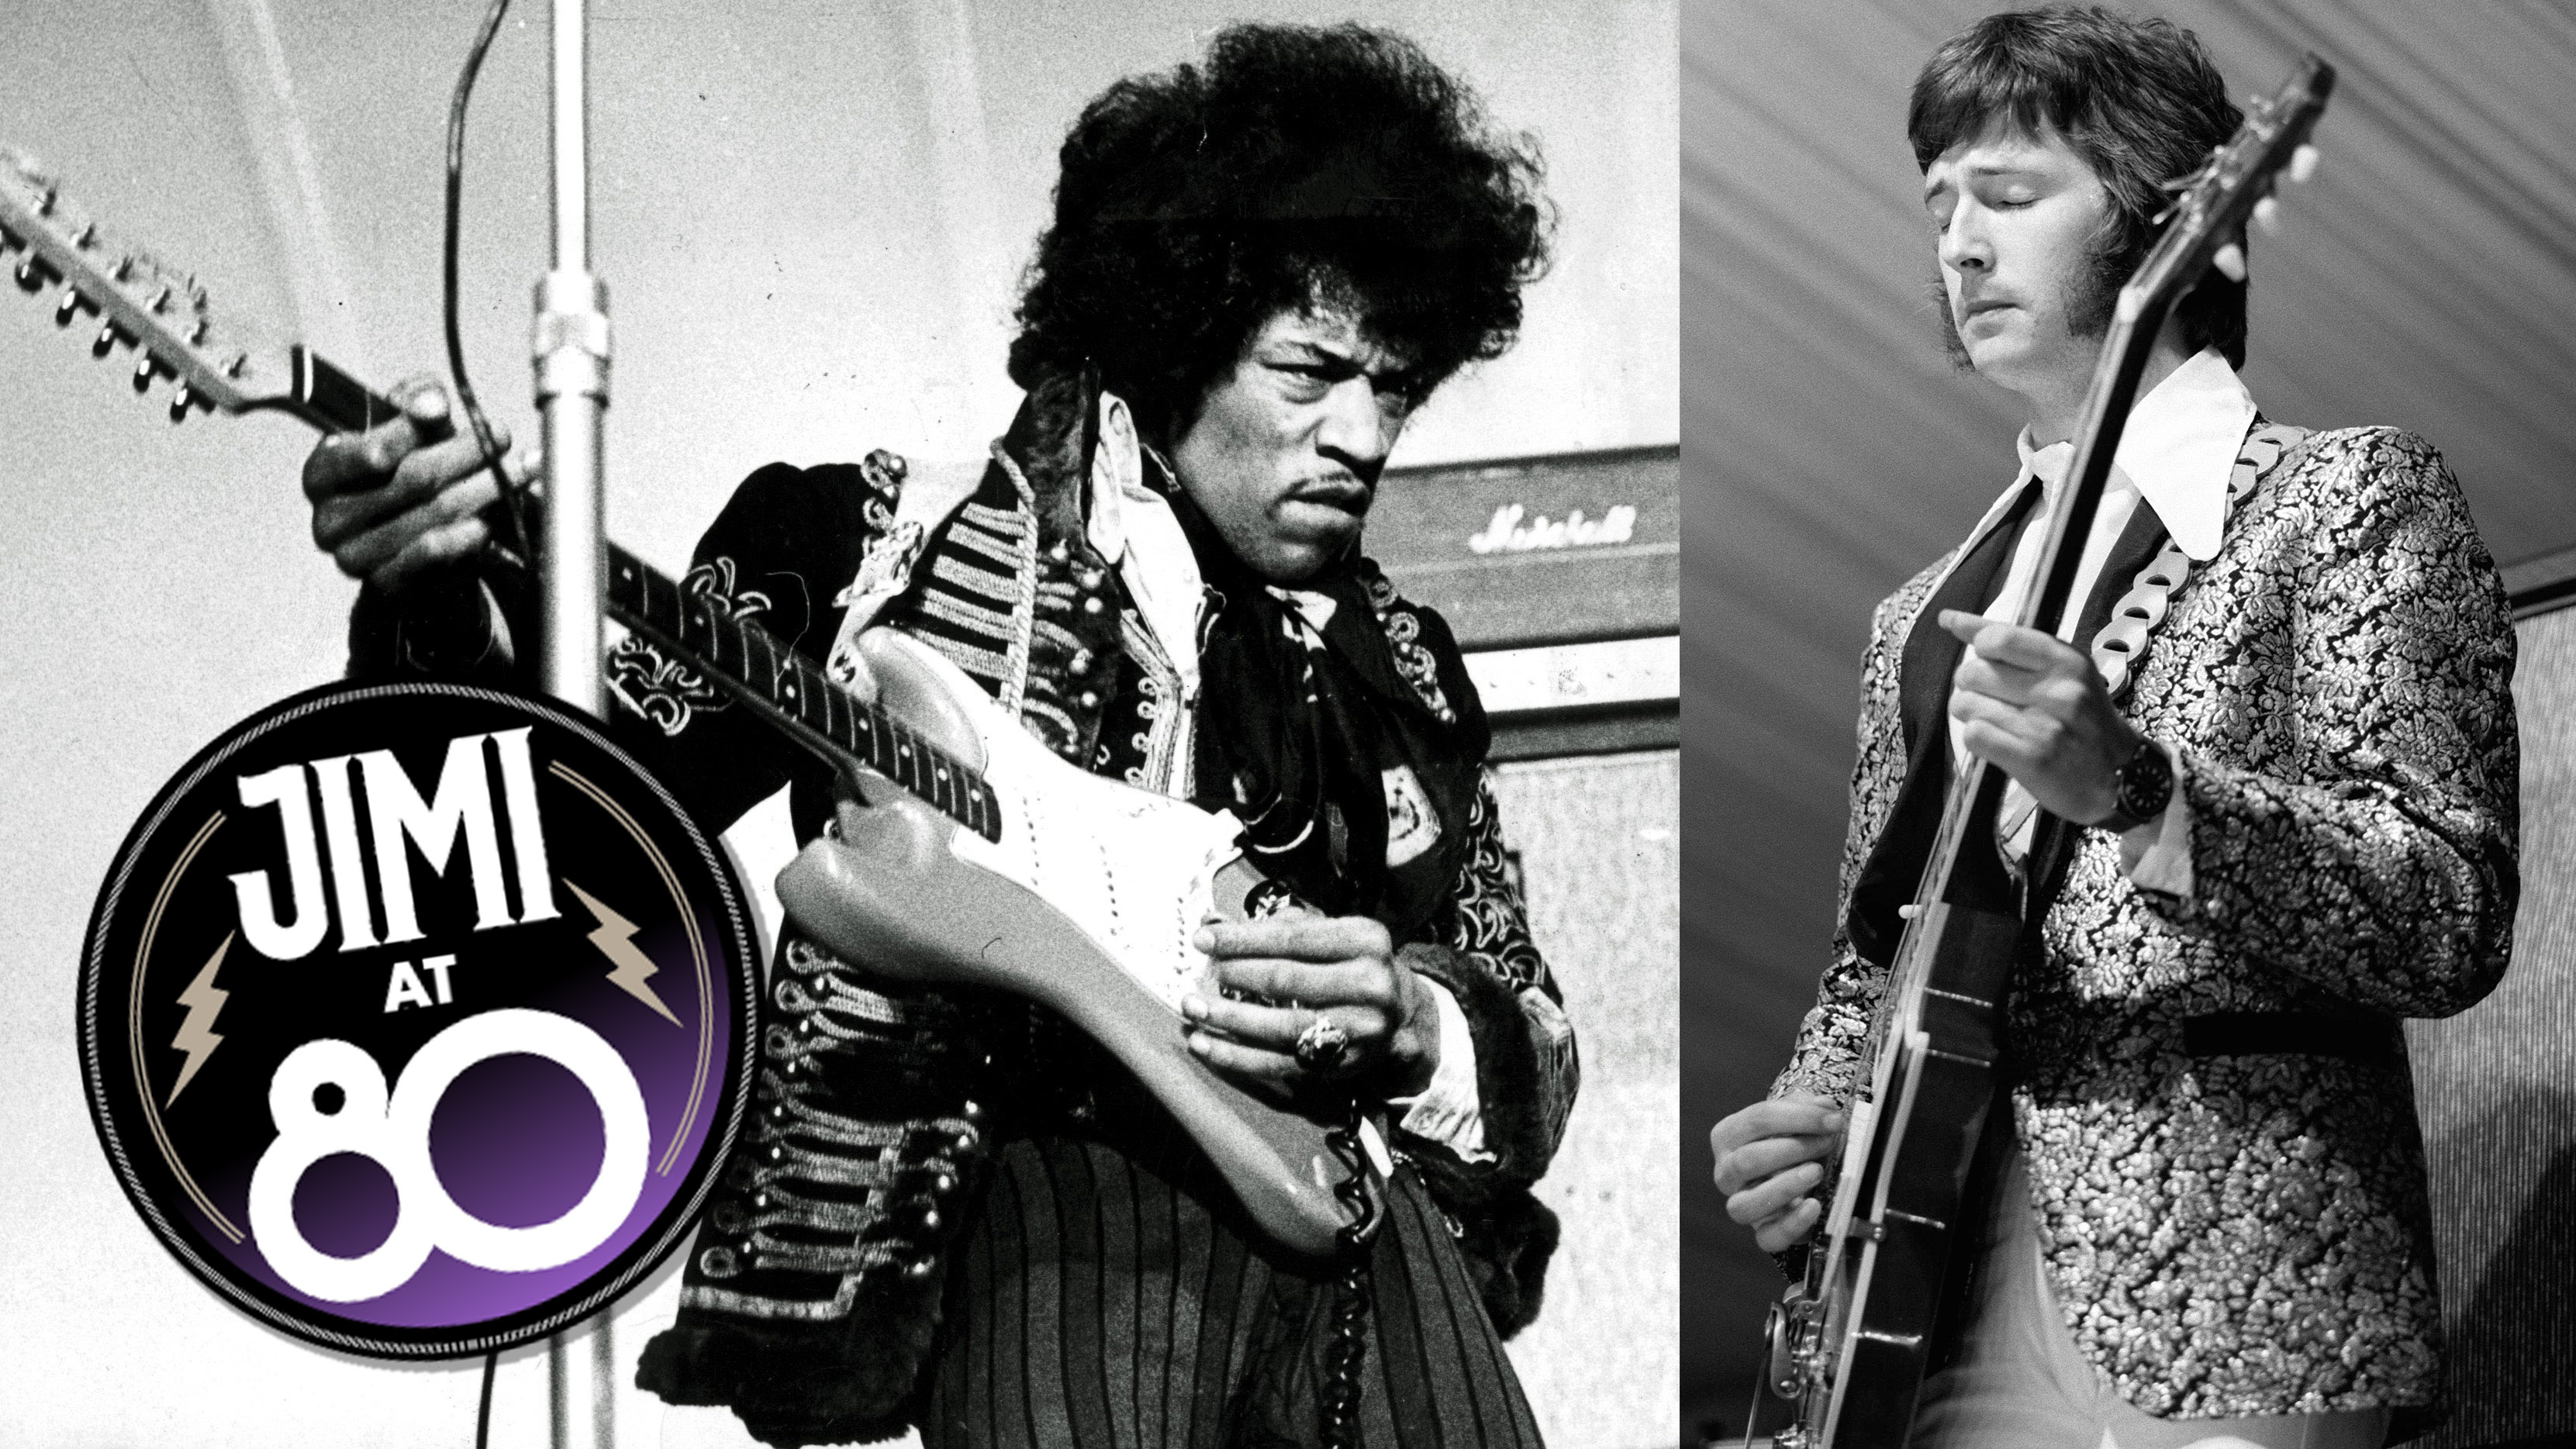 On his new album, Bob Wolfman pays tribute to his friend Jimi